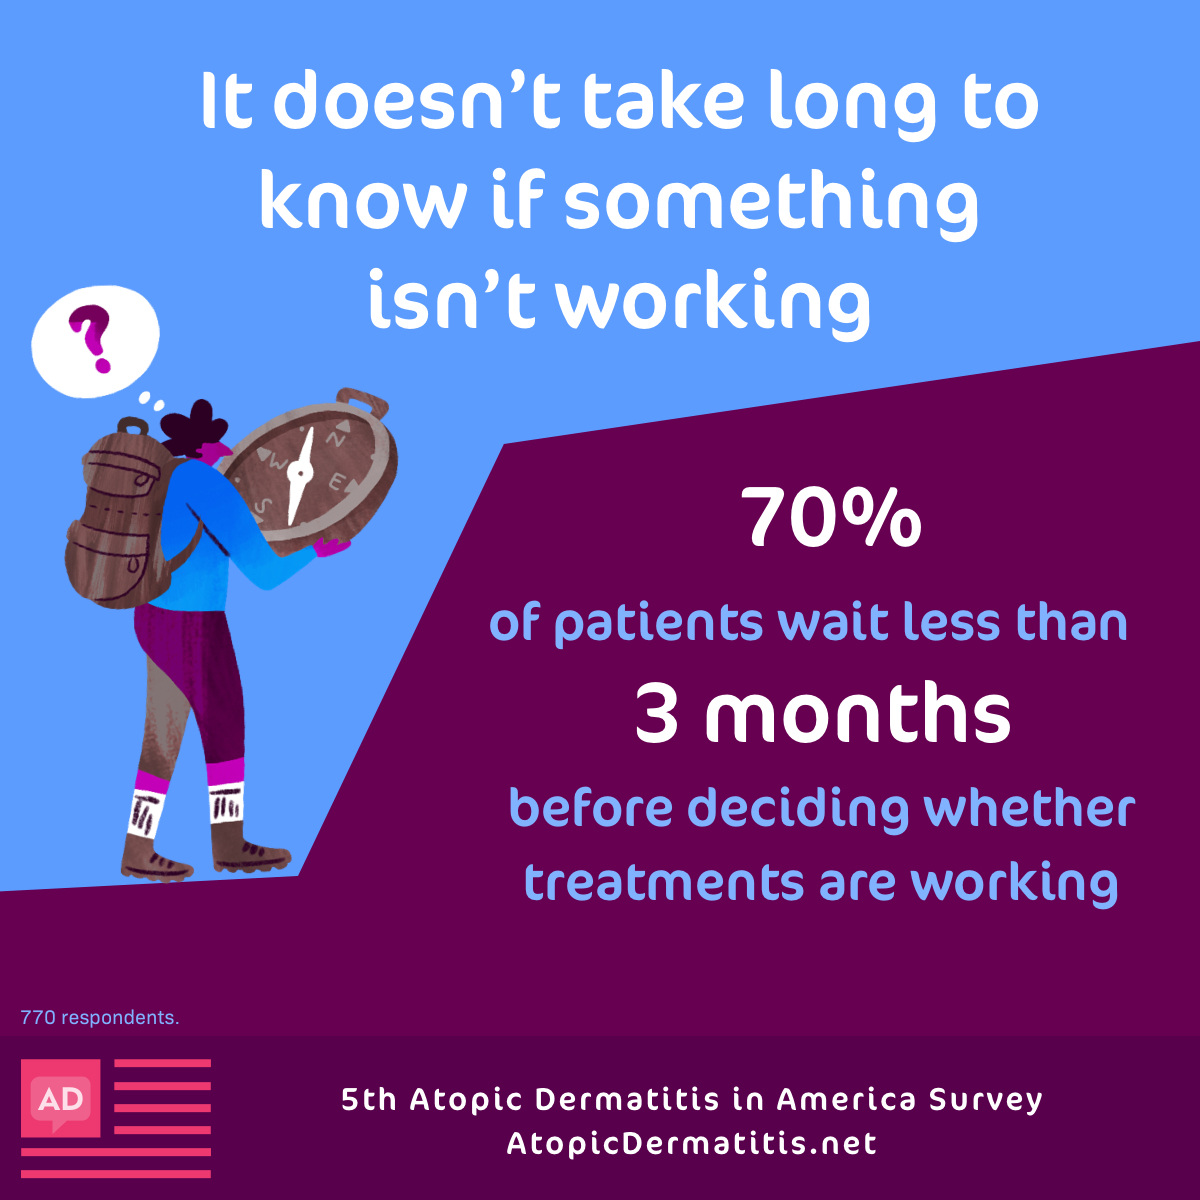 70% of respondents wait less than 3 months before deciding whether topical or non-topical treatments are working.